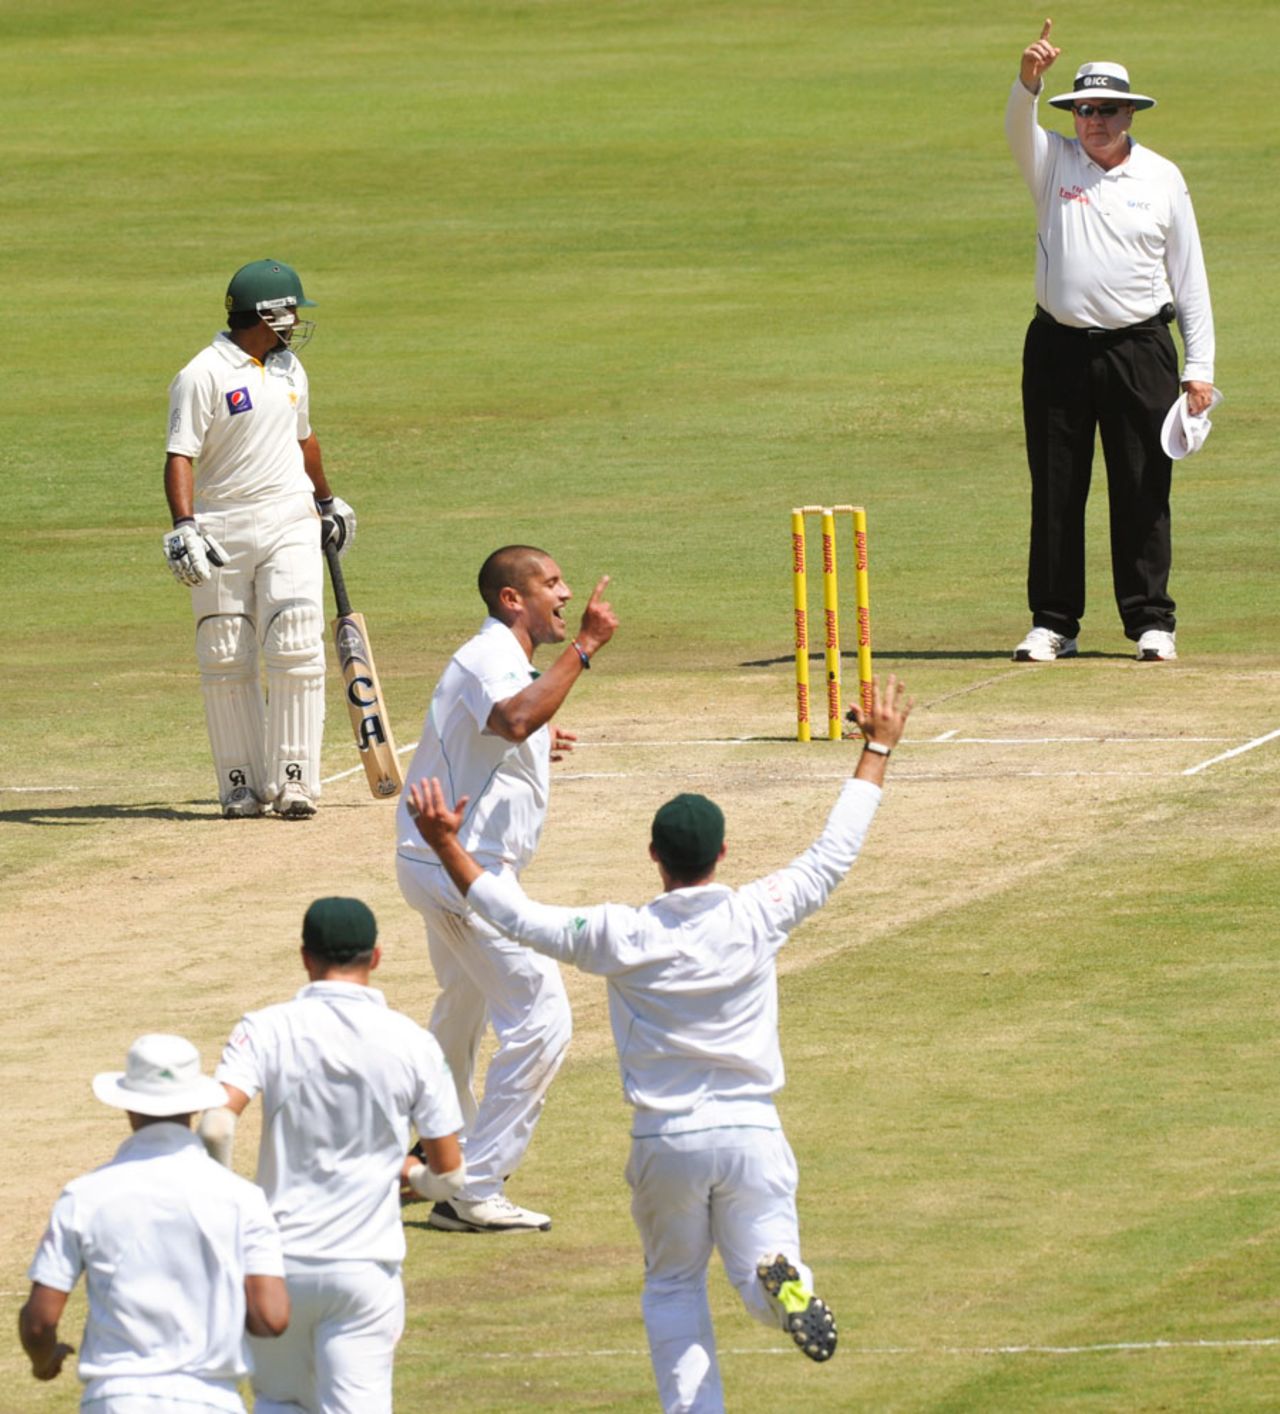 Rory Kleinveldt celebrates Misbah-ul-Haq's wicket, South Africa v Pakistan, 3rd Test, Centurion, 3rd day, February 24, 2013